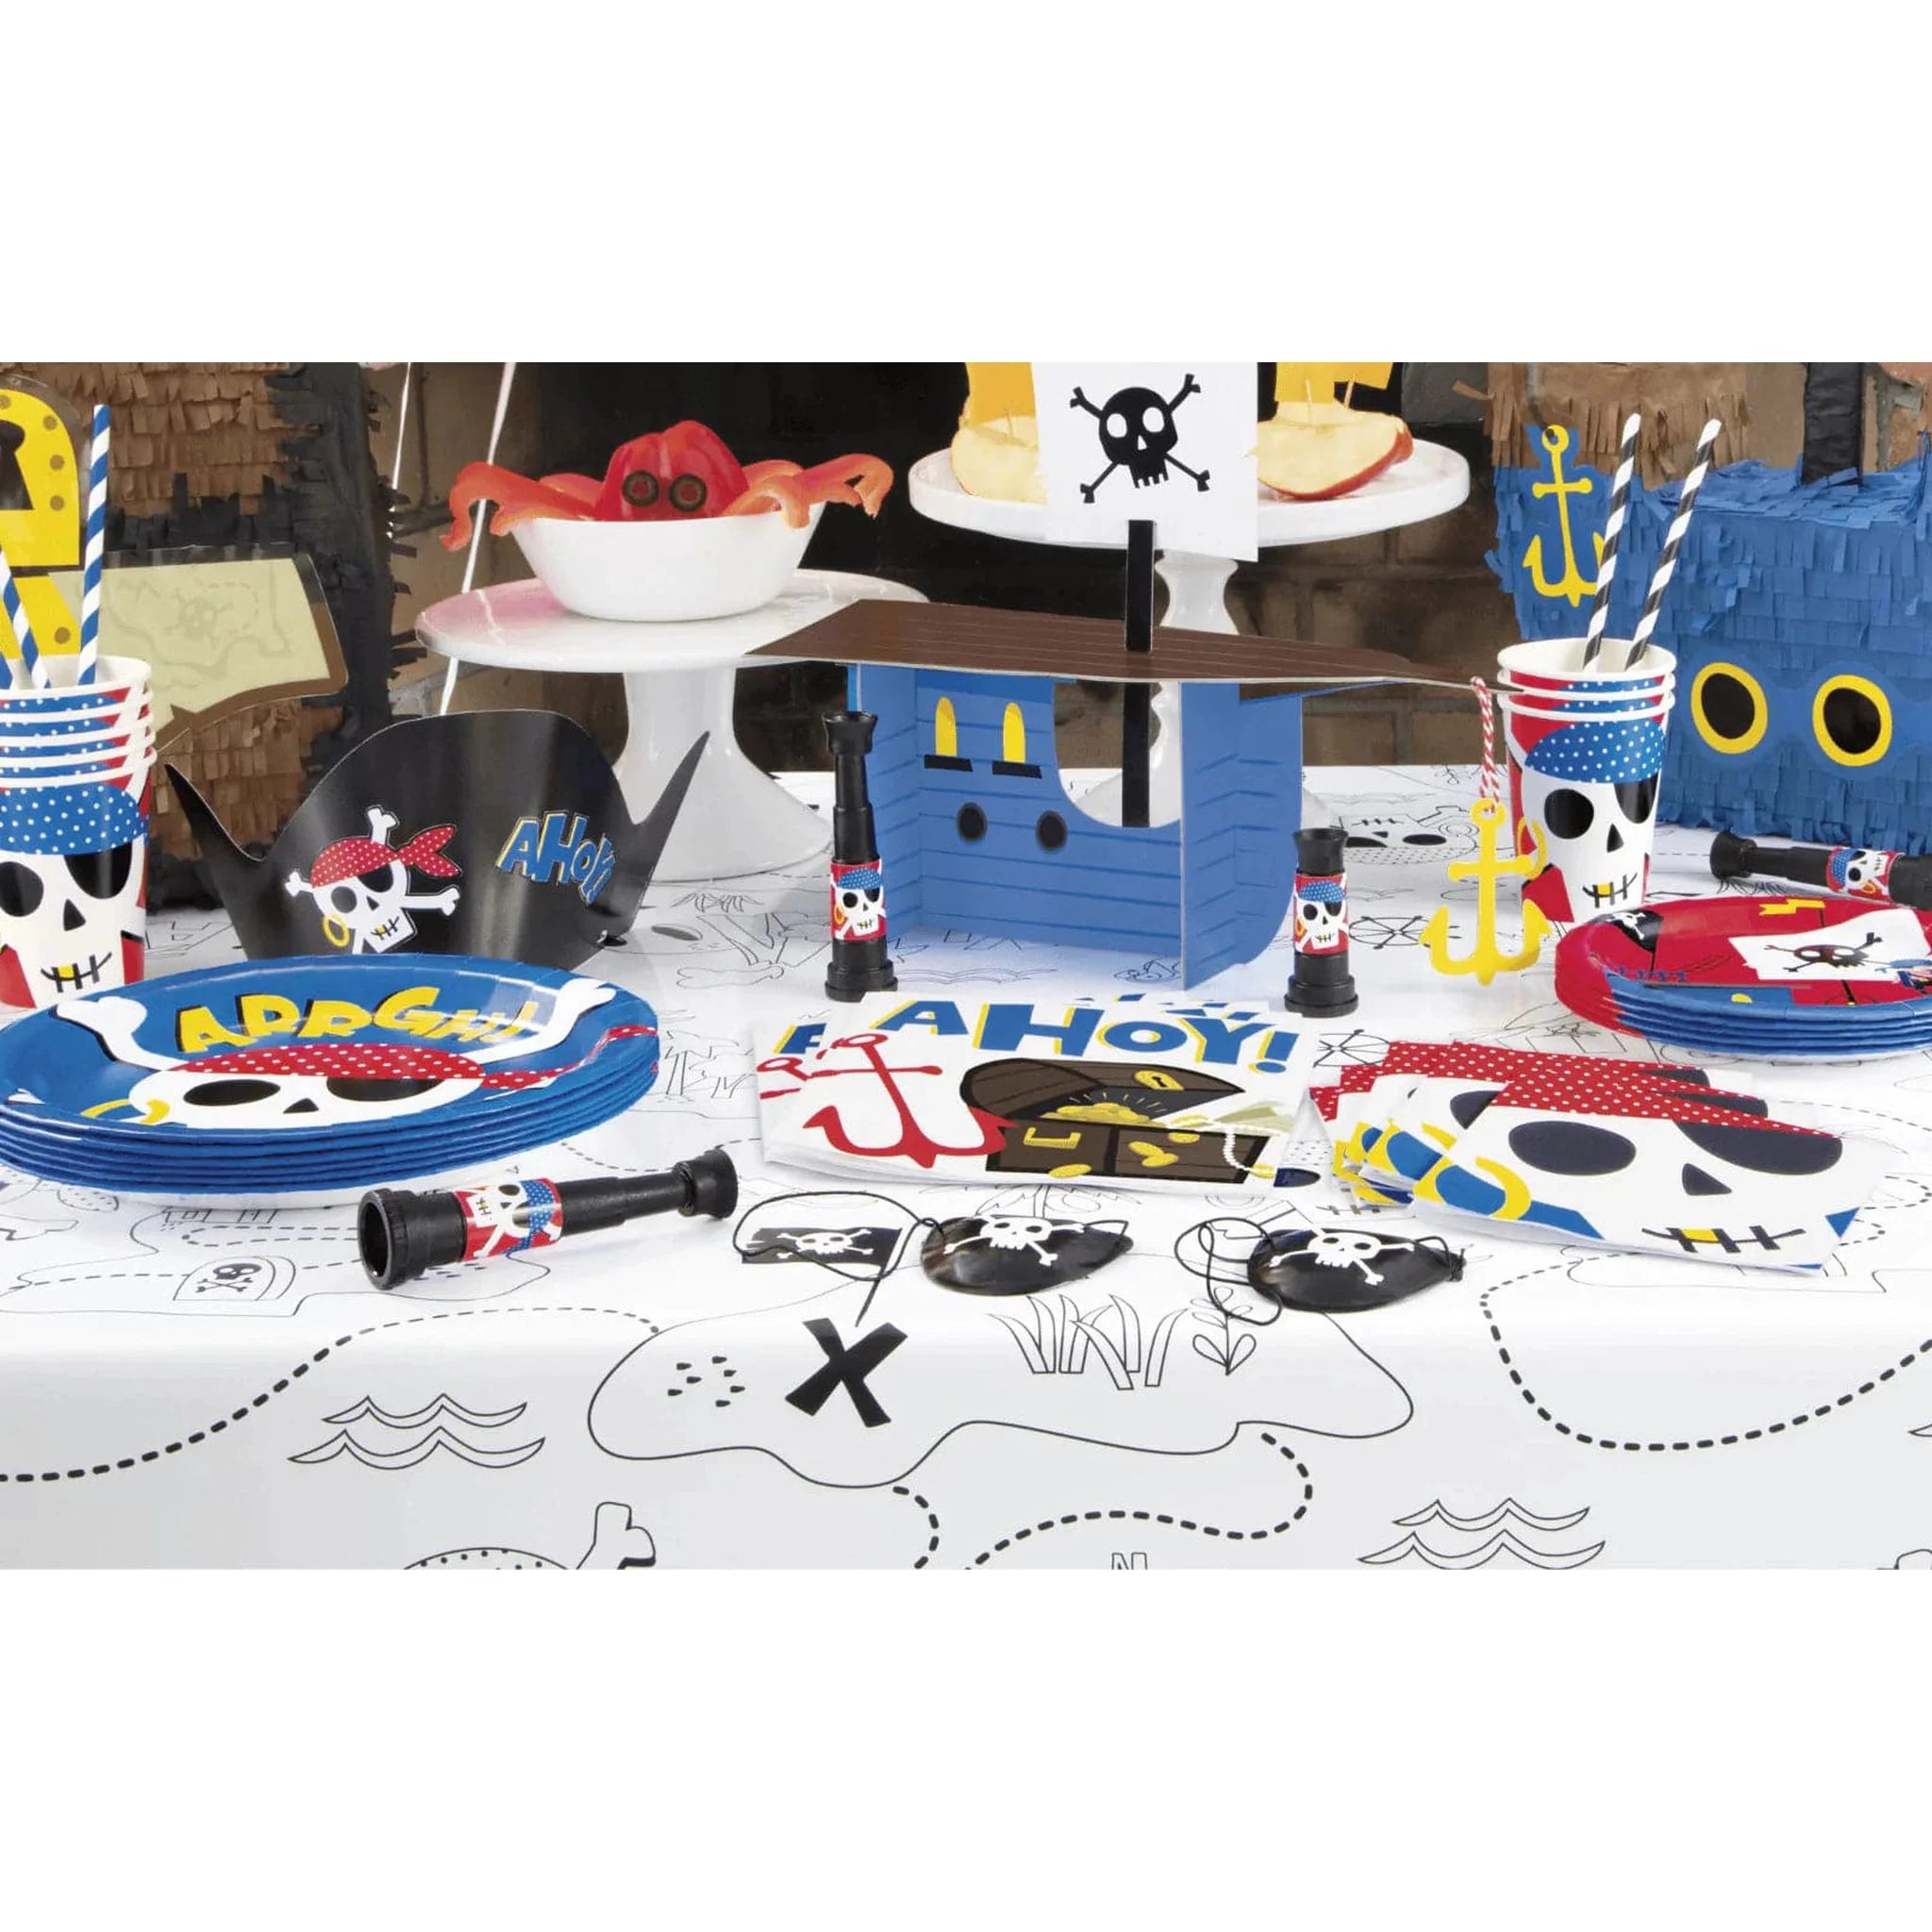 Ahoy Pirate Party Game - Kids Party Craft